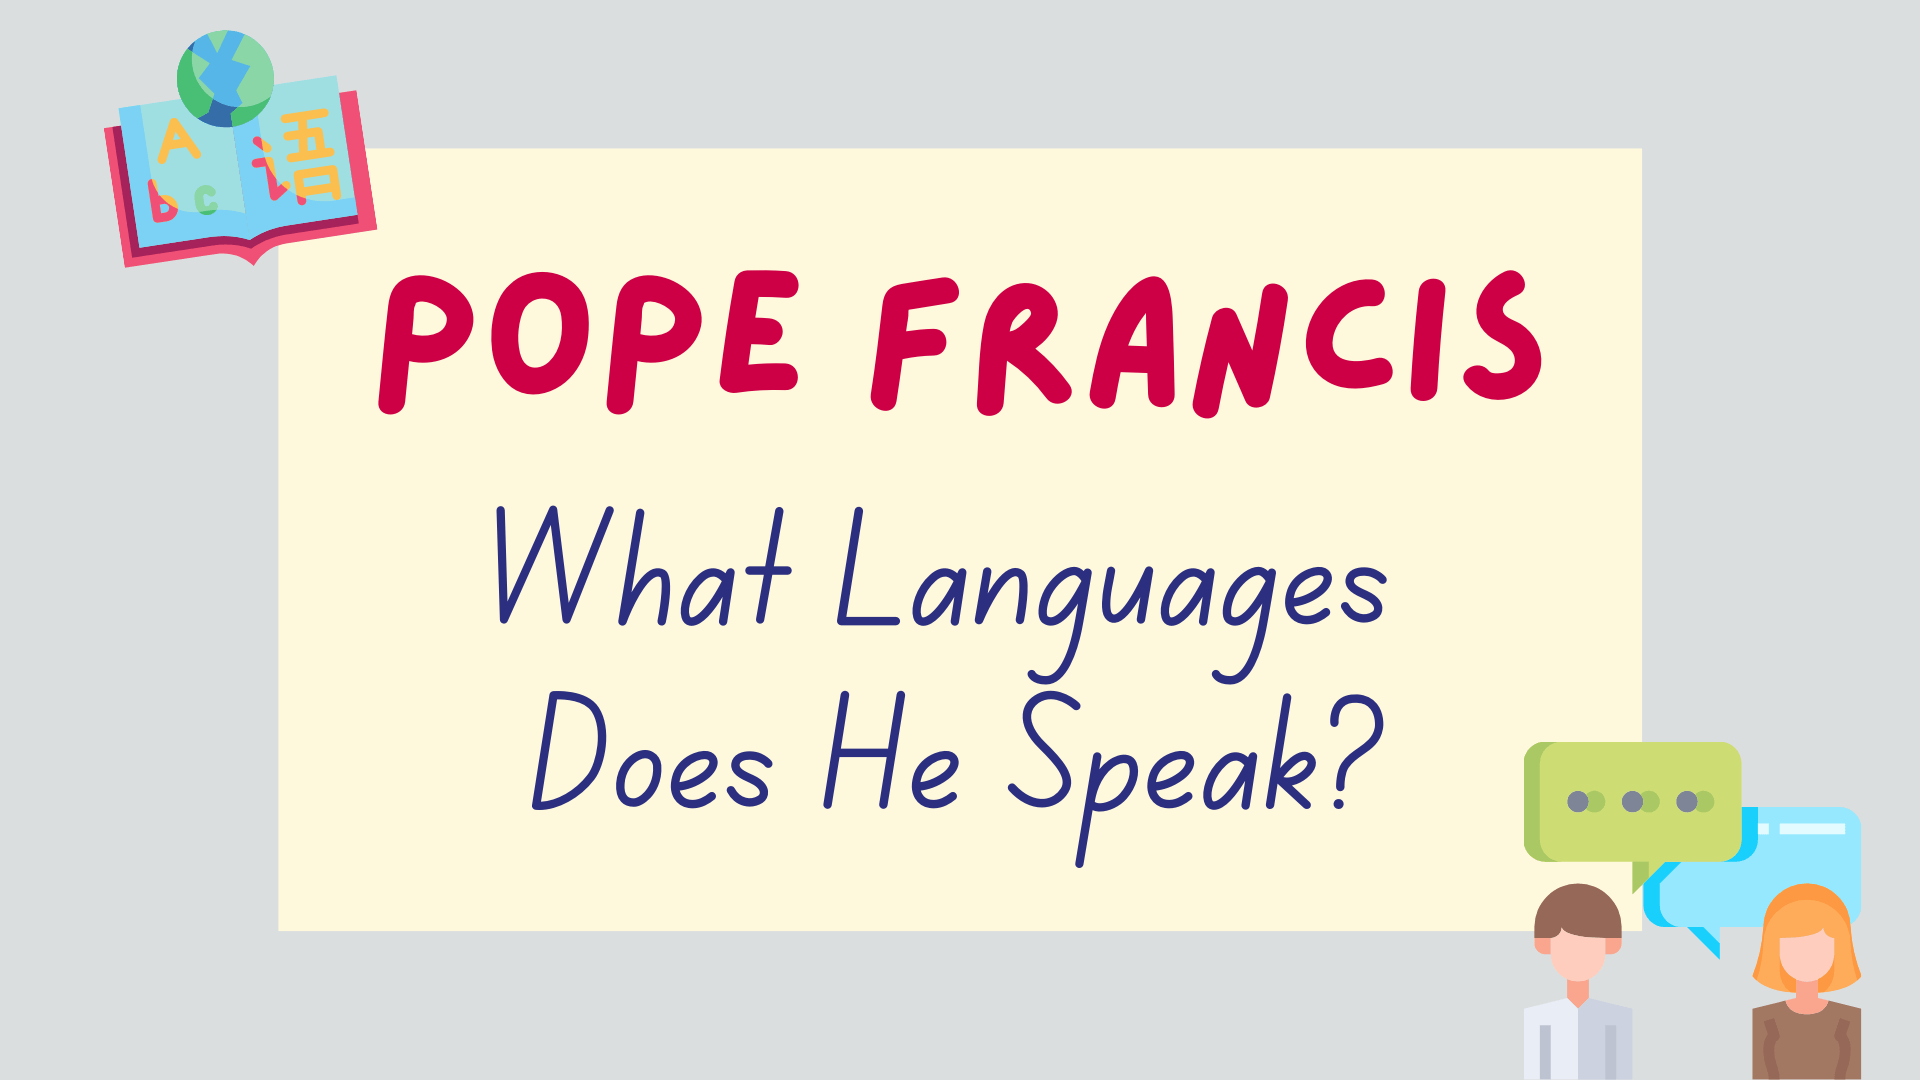 what languages does pope francis speak - featured image